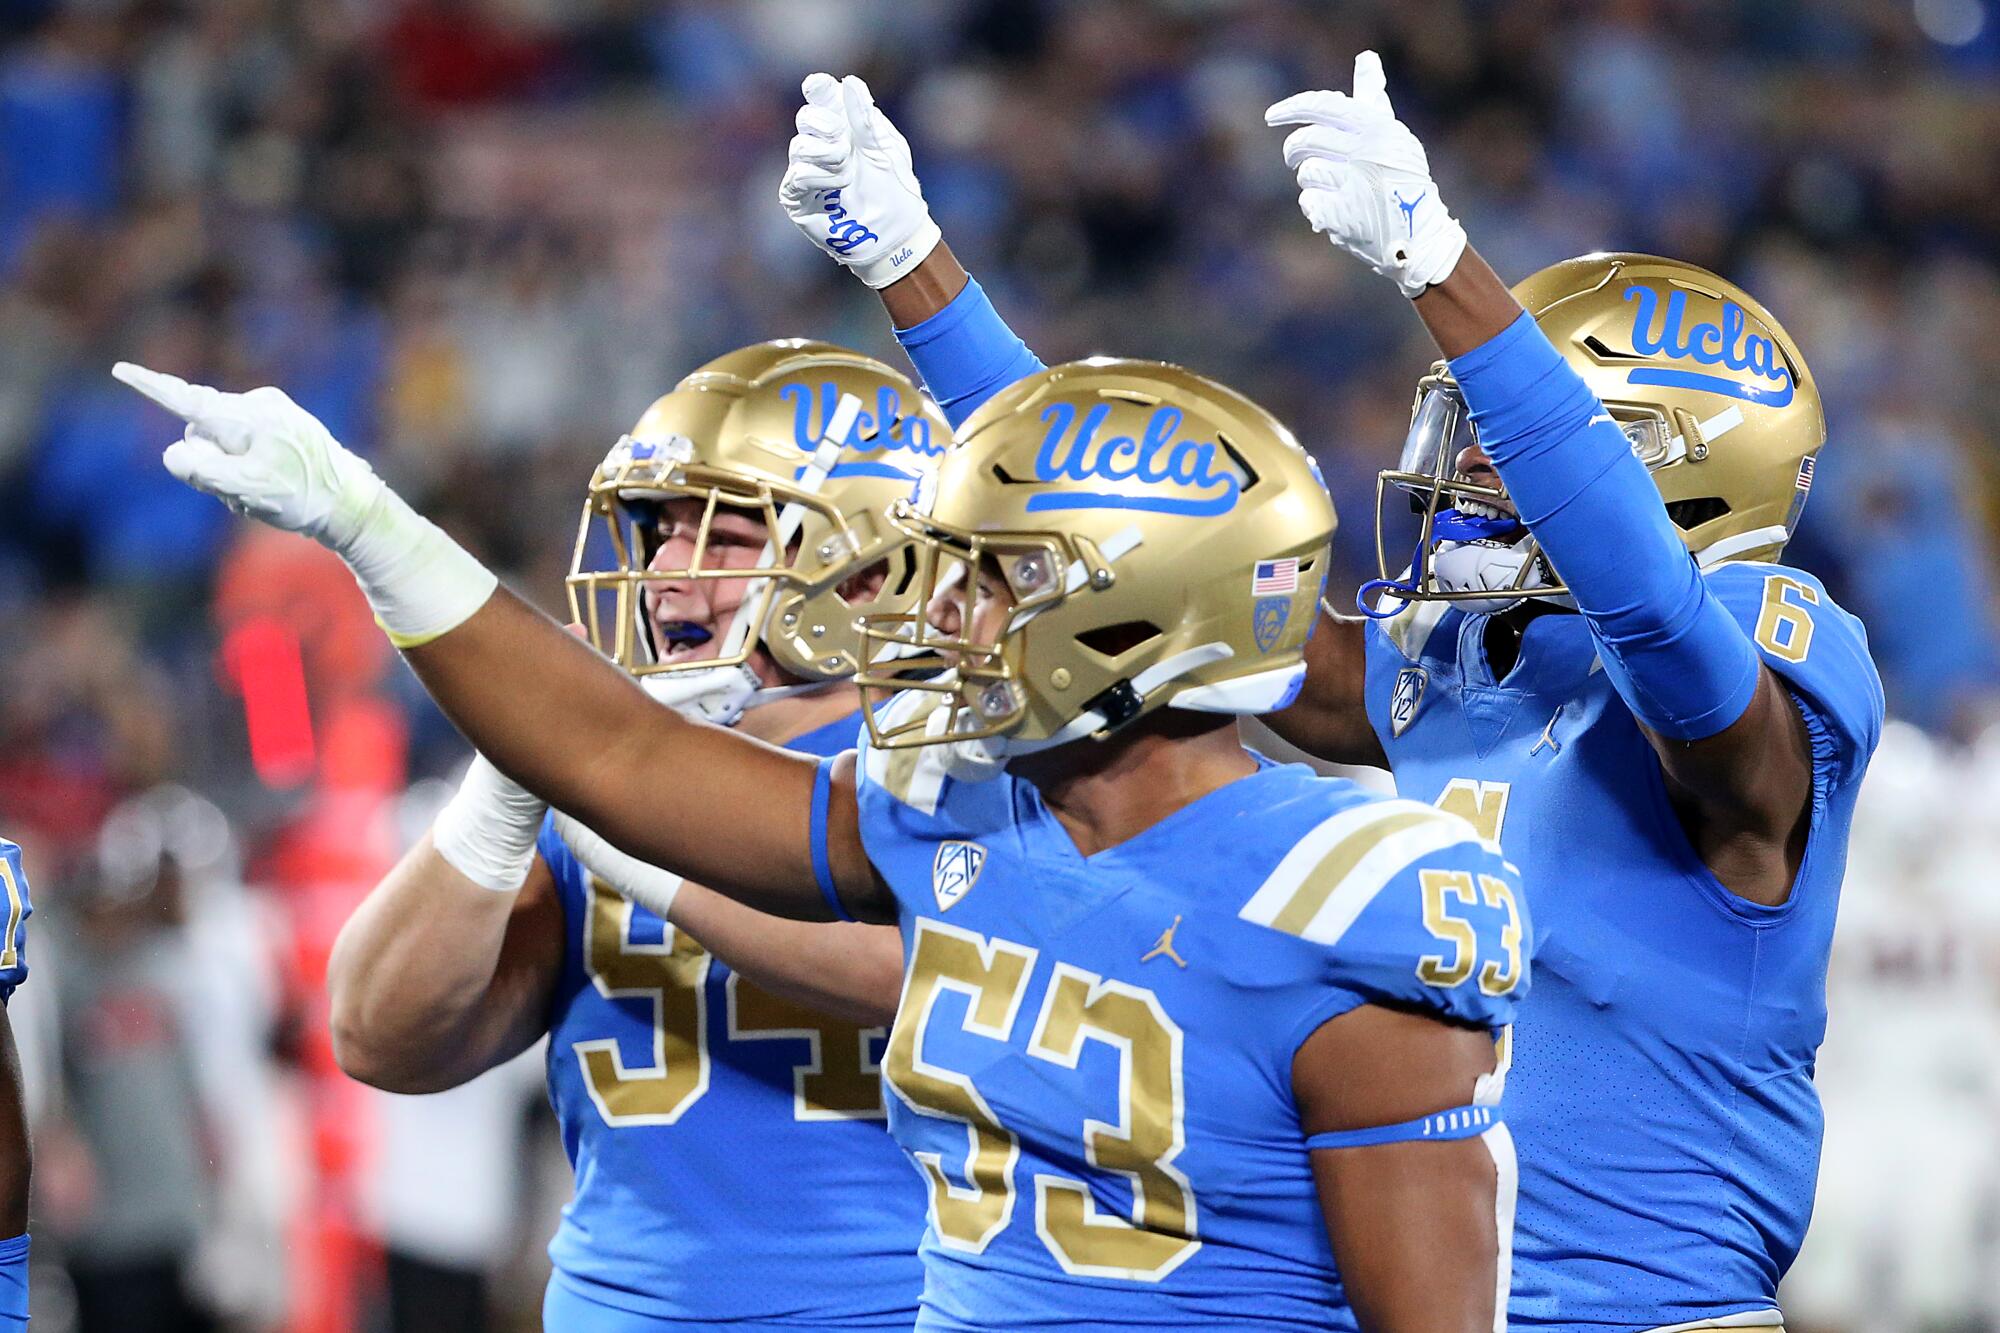 UCLA Shuts Out Utah, Claims First Walk-Off Win of 2023